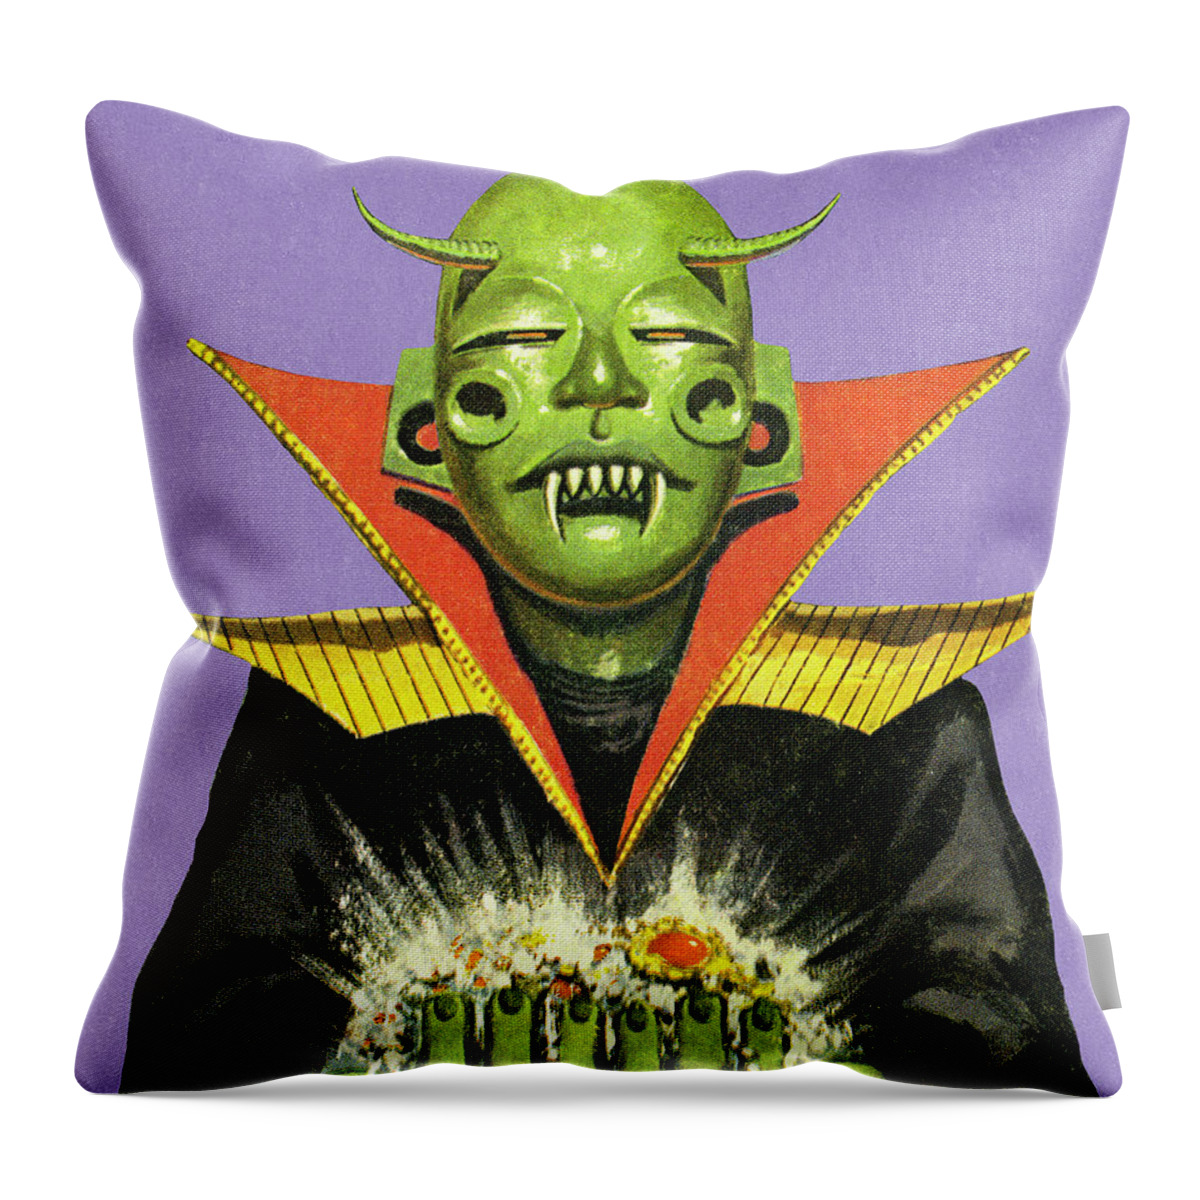 Accessories Throw Pillow featuring the drawing Alien Holding Jewels by CSA Images